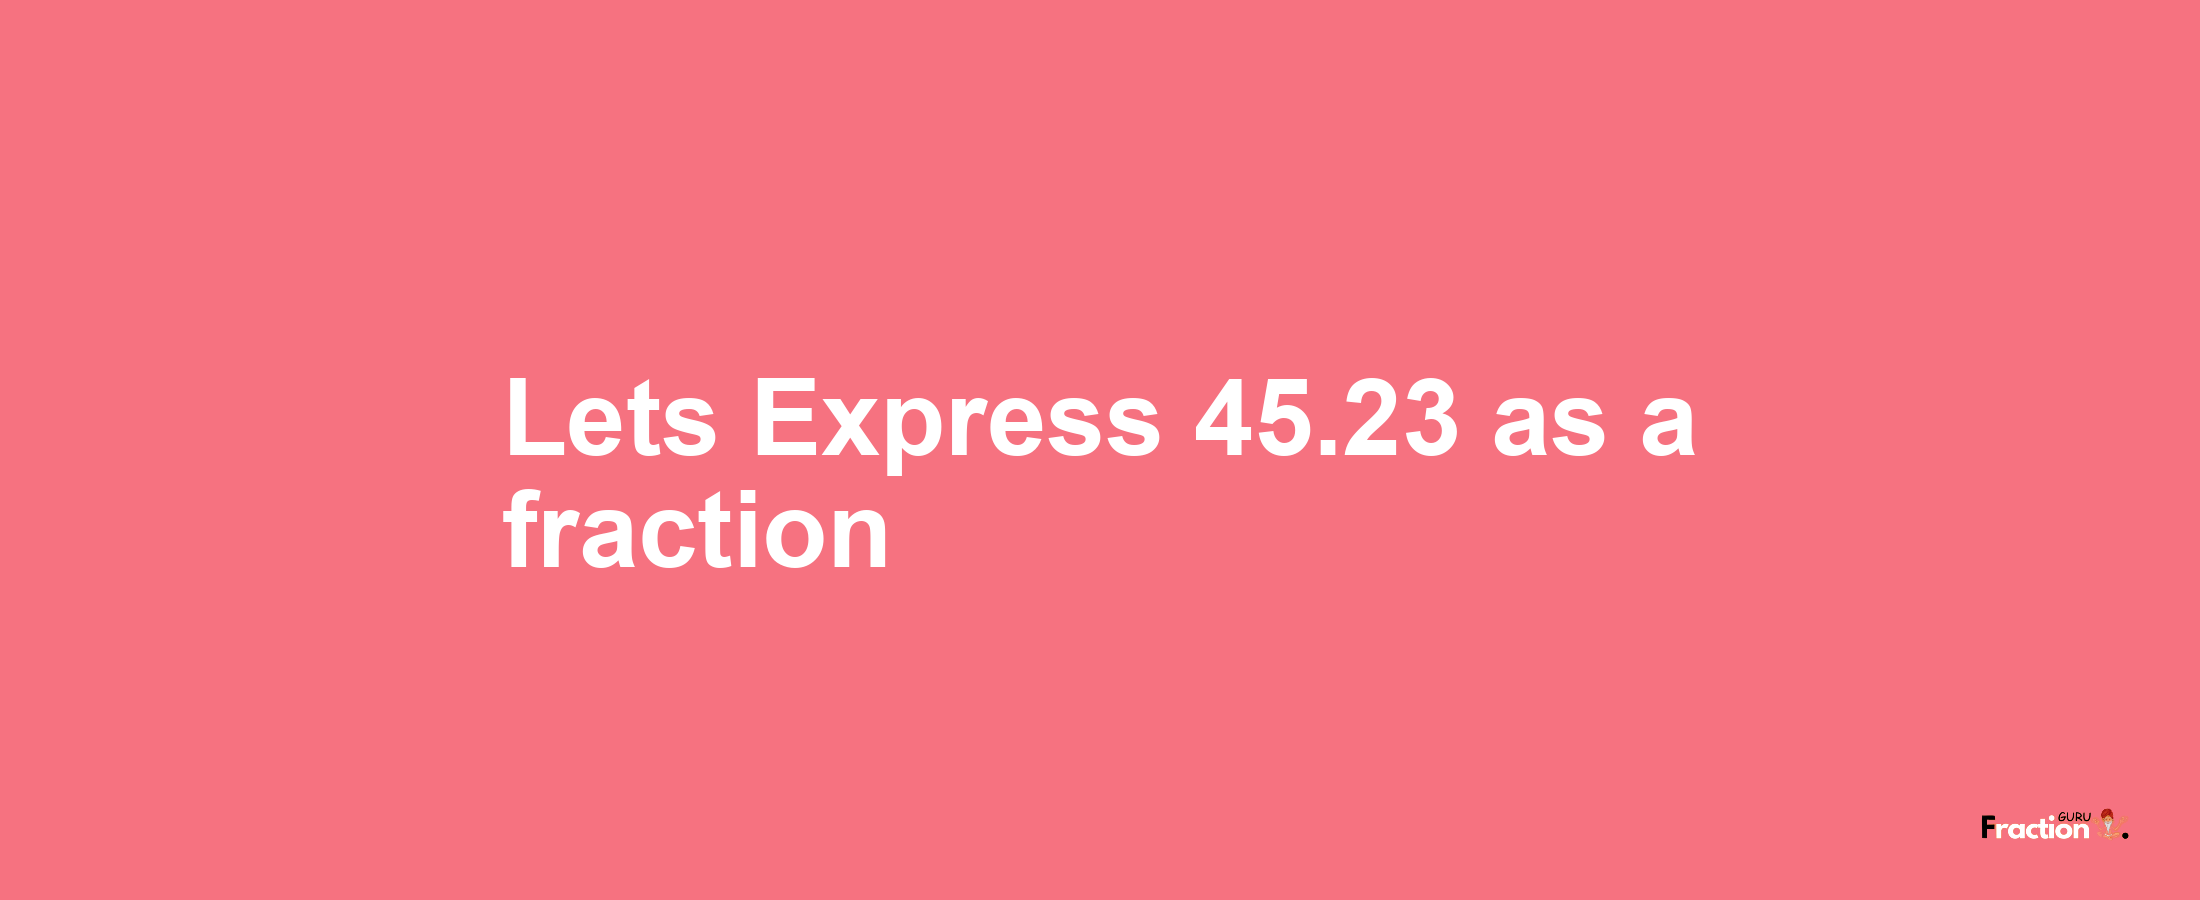 Lets Express 45.23 as afraction